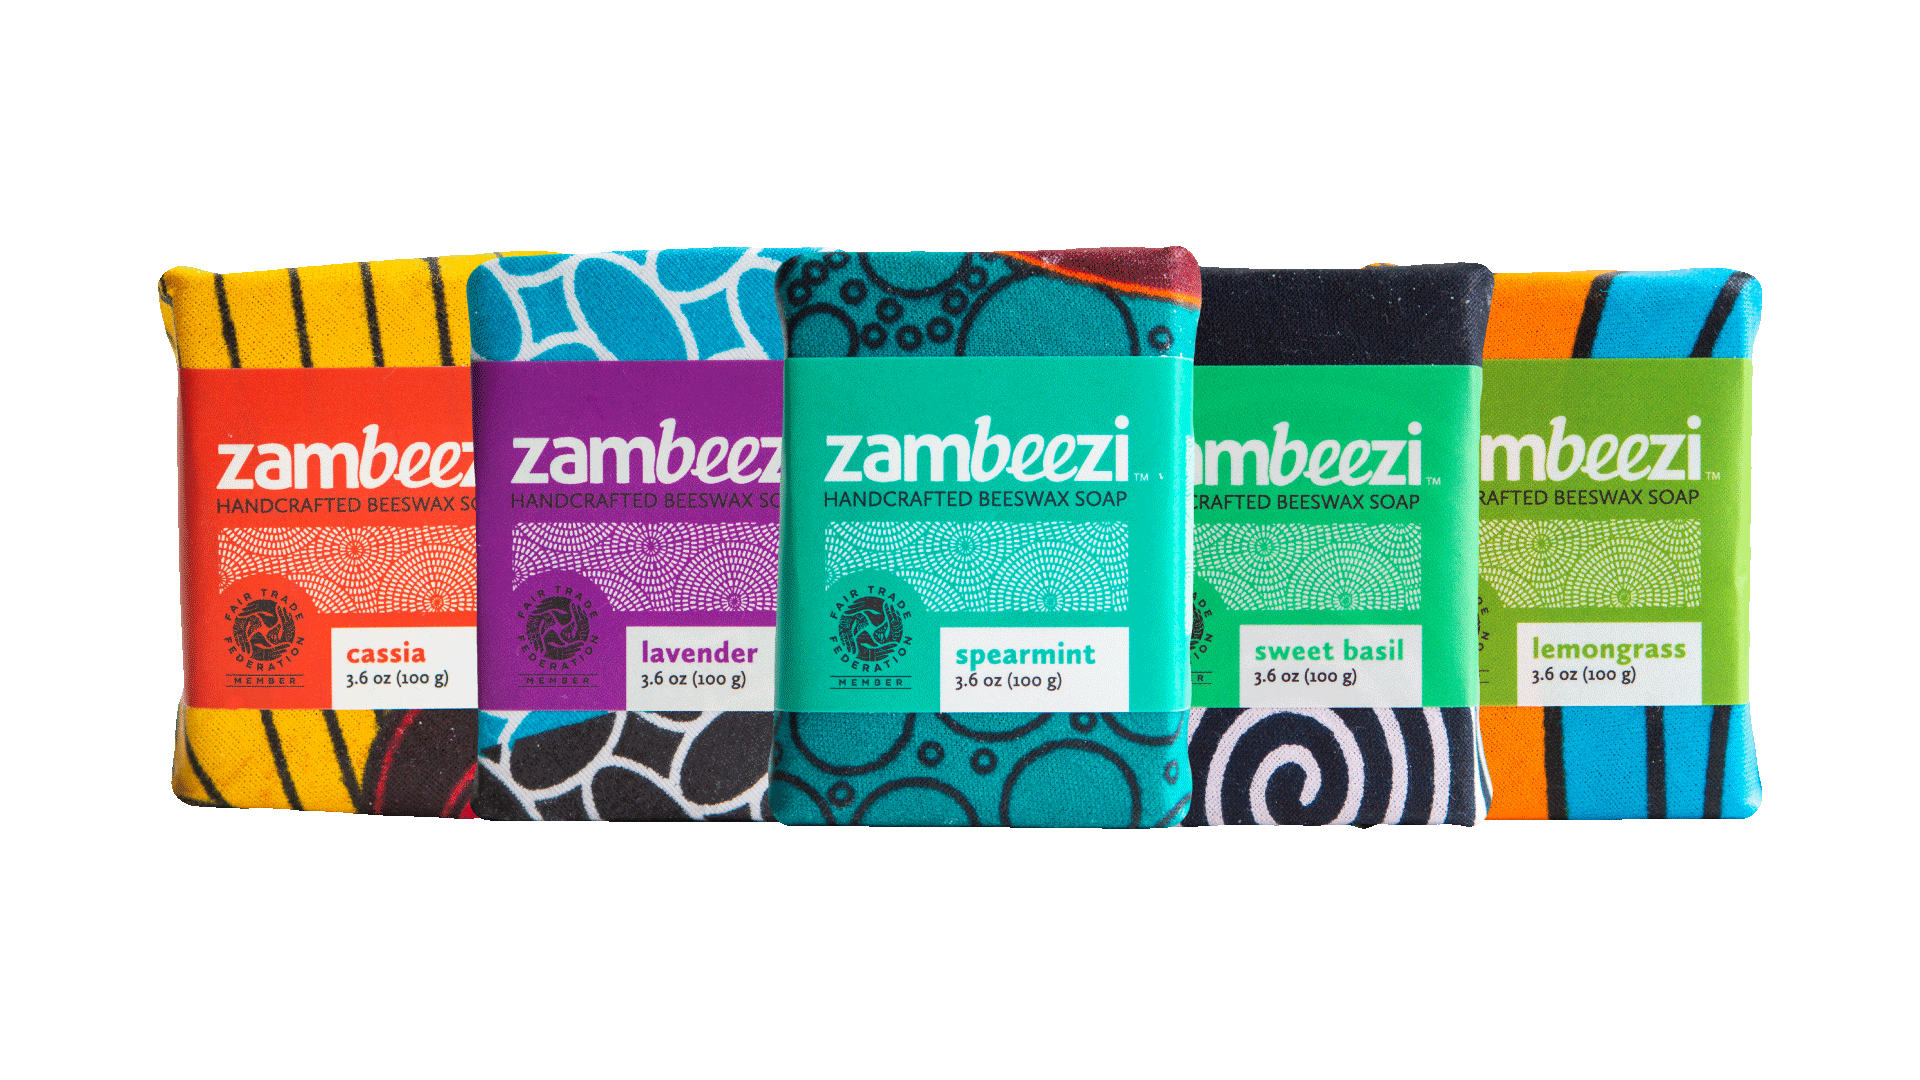 Zambeezi Handcrafted Beeswax Soap - Six All Natural, Ethical, Fair Trade soap bars made by hand in Zambia, Africa